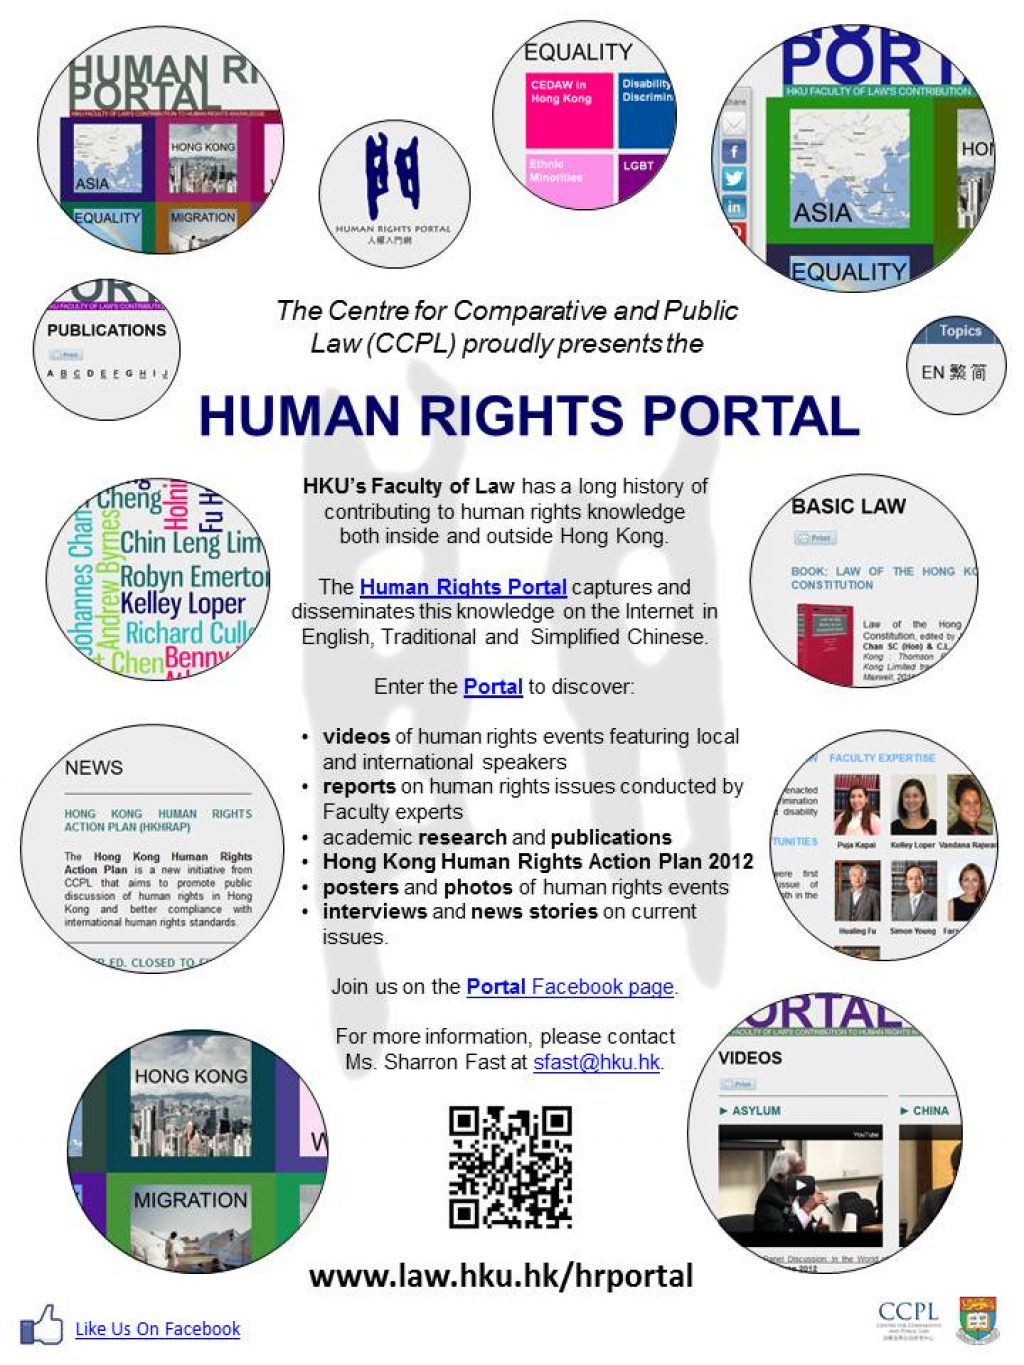 CCPL Human Rights Portal - HKU Faculty of Law's Contribution to Human Rights Knowledge